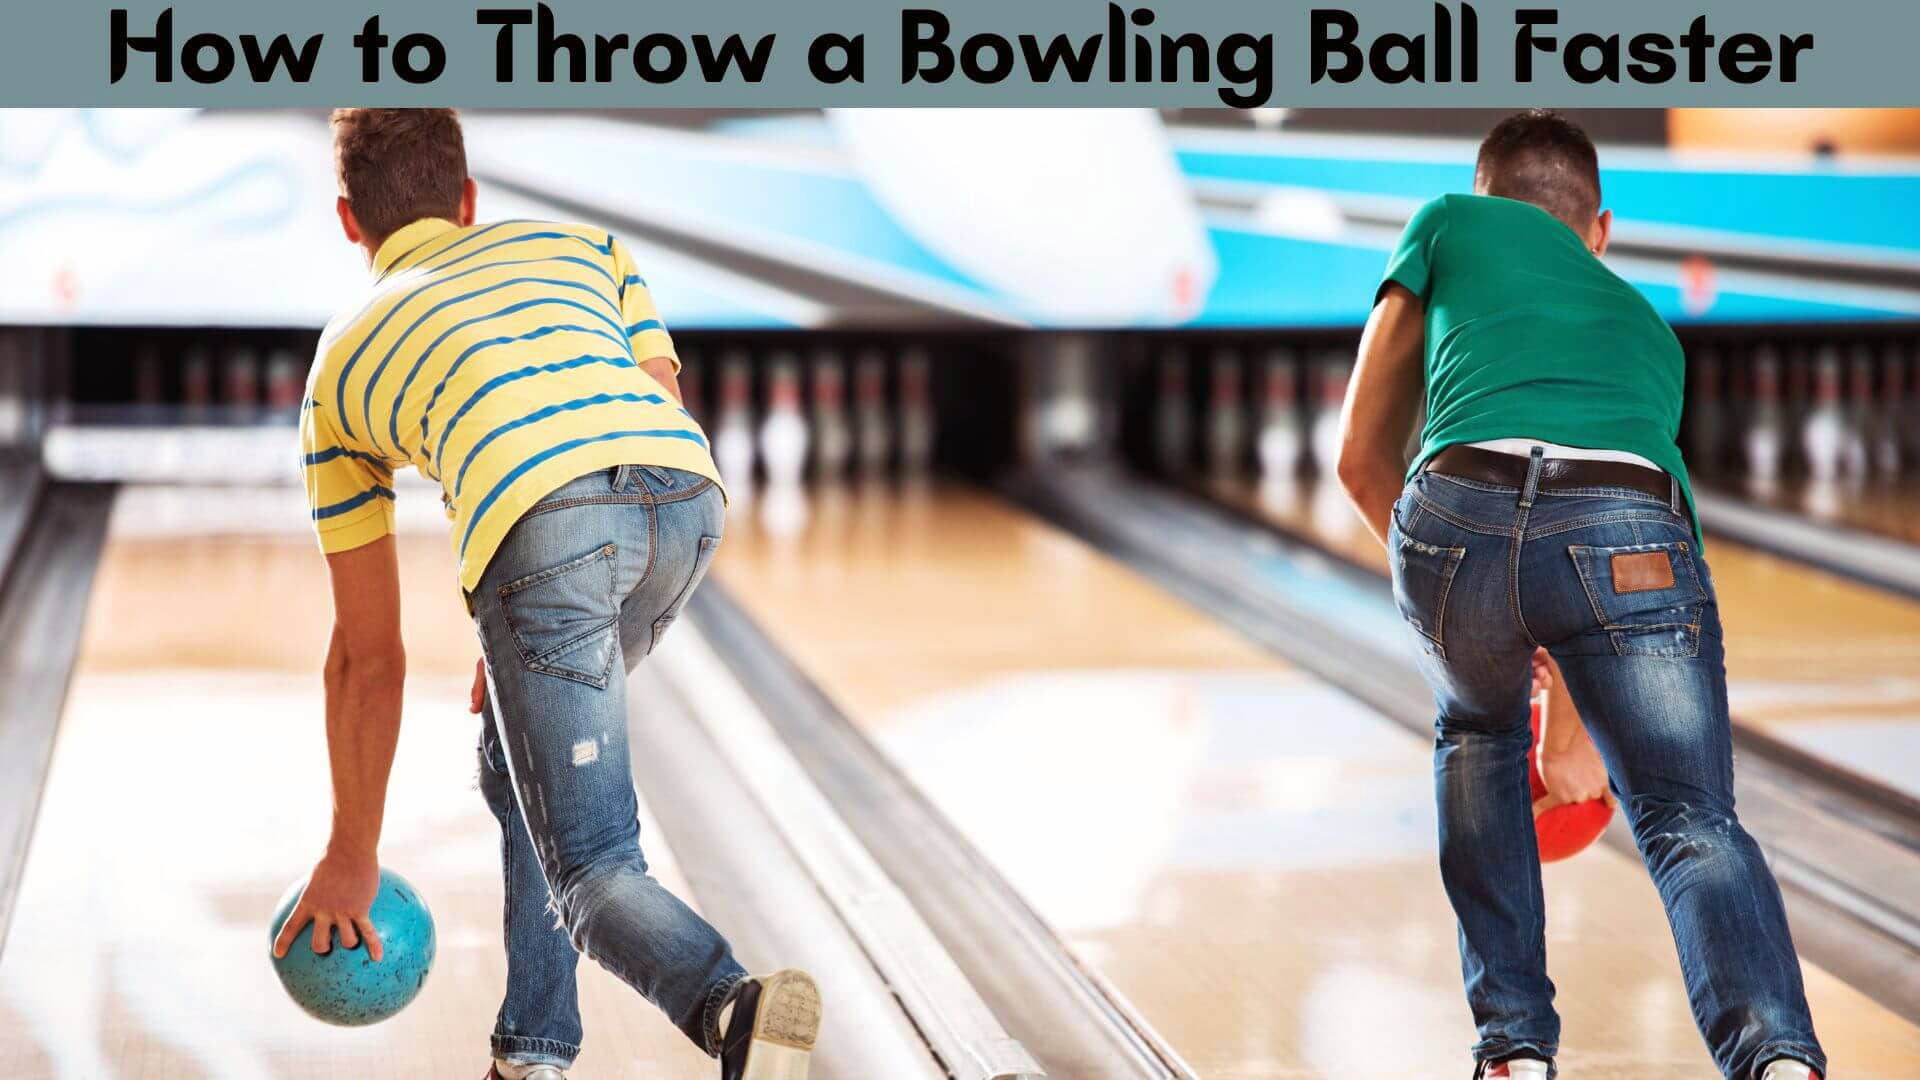 How to Throw a Bowling Ball Faster